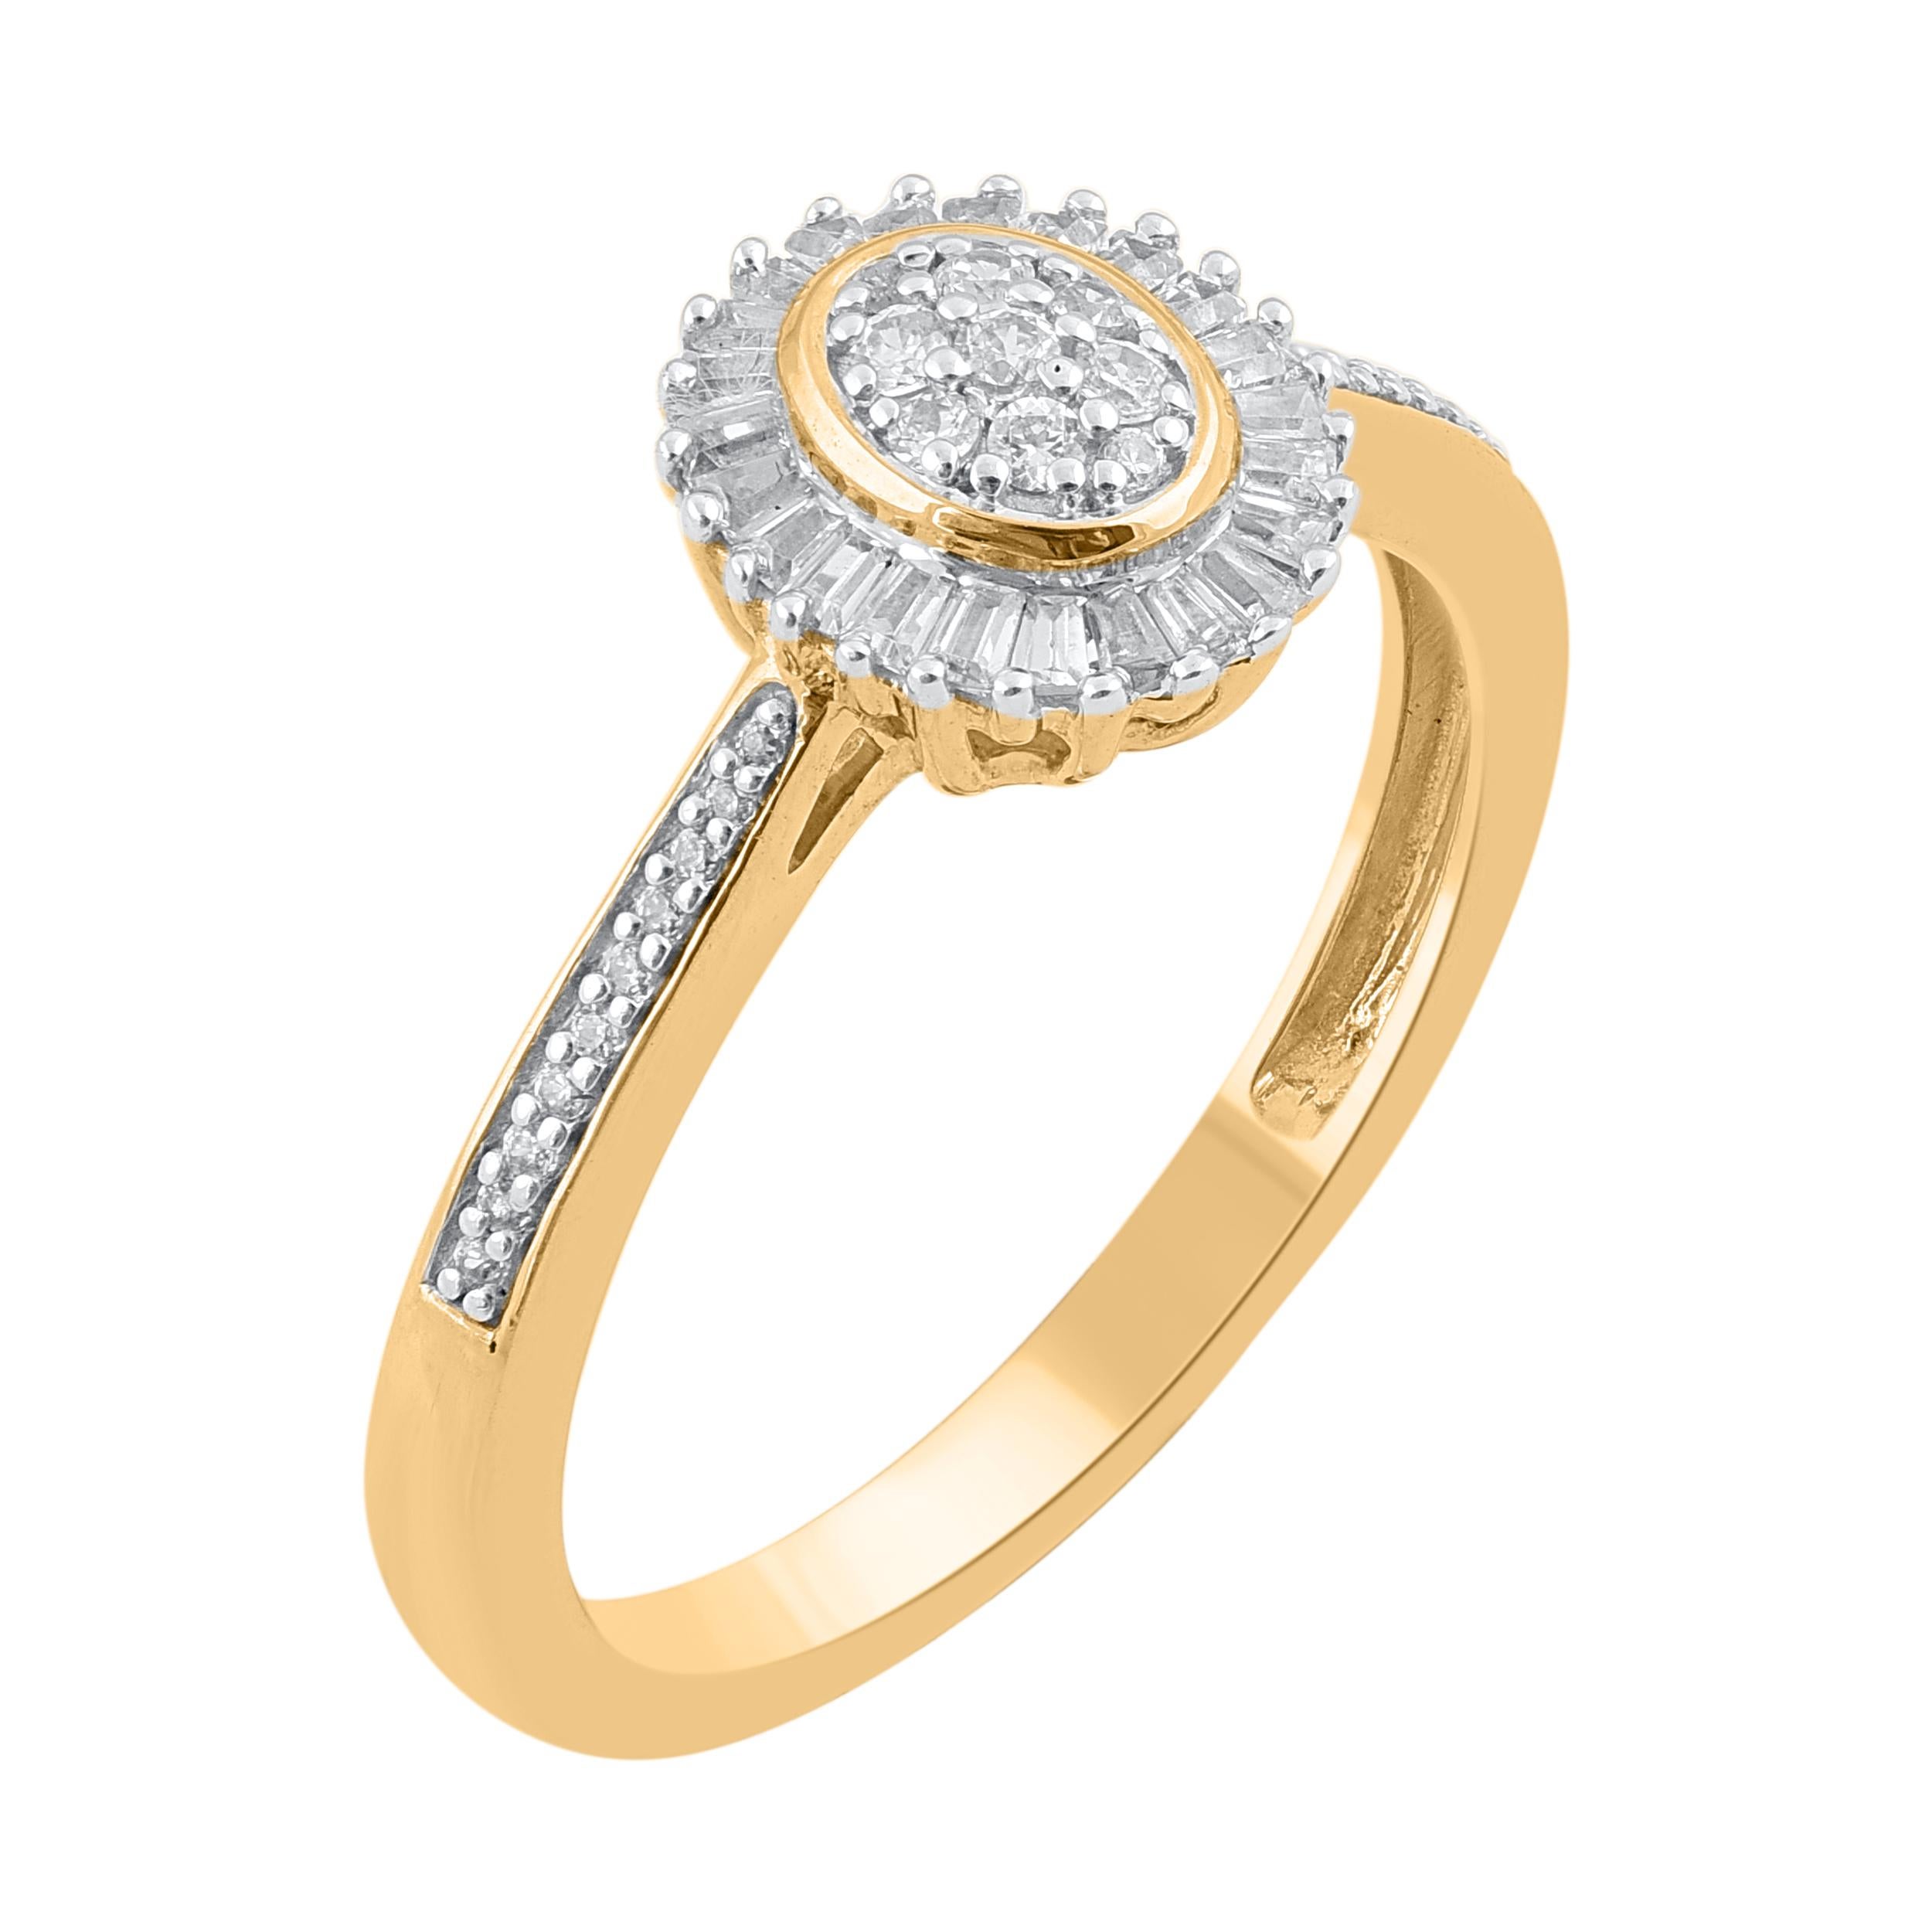 Add a touch of elegance with this diamond engagement ring. This ring is beautifully crafted in 14 karat yellow gold and set with 53 single cut, brilliant cut & baguette diamond in pave & channel setting. The total weight of diamonds is 0.25 carat,